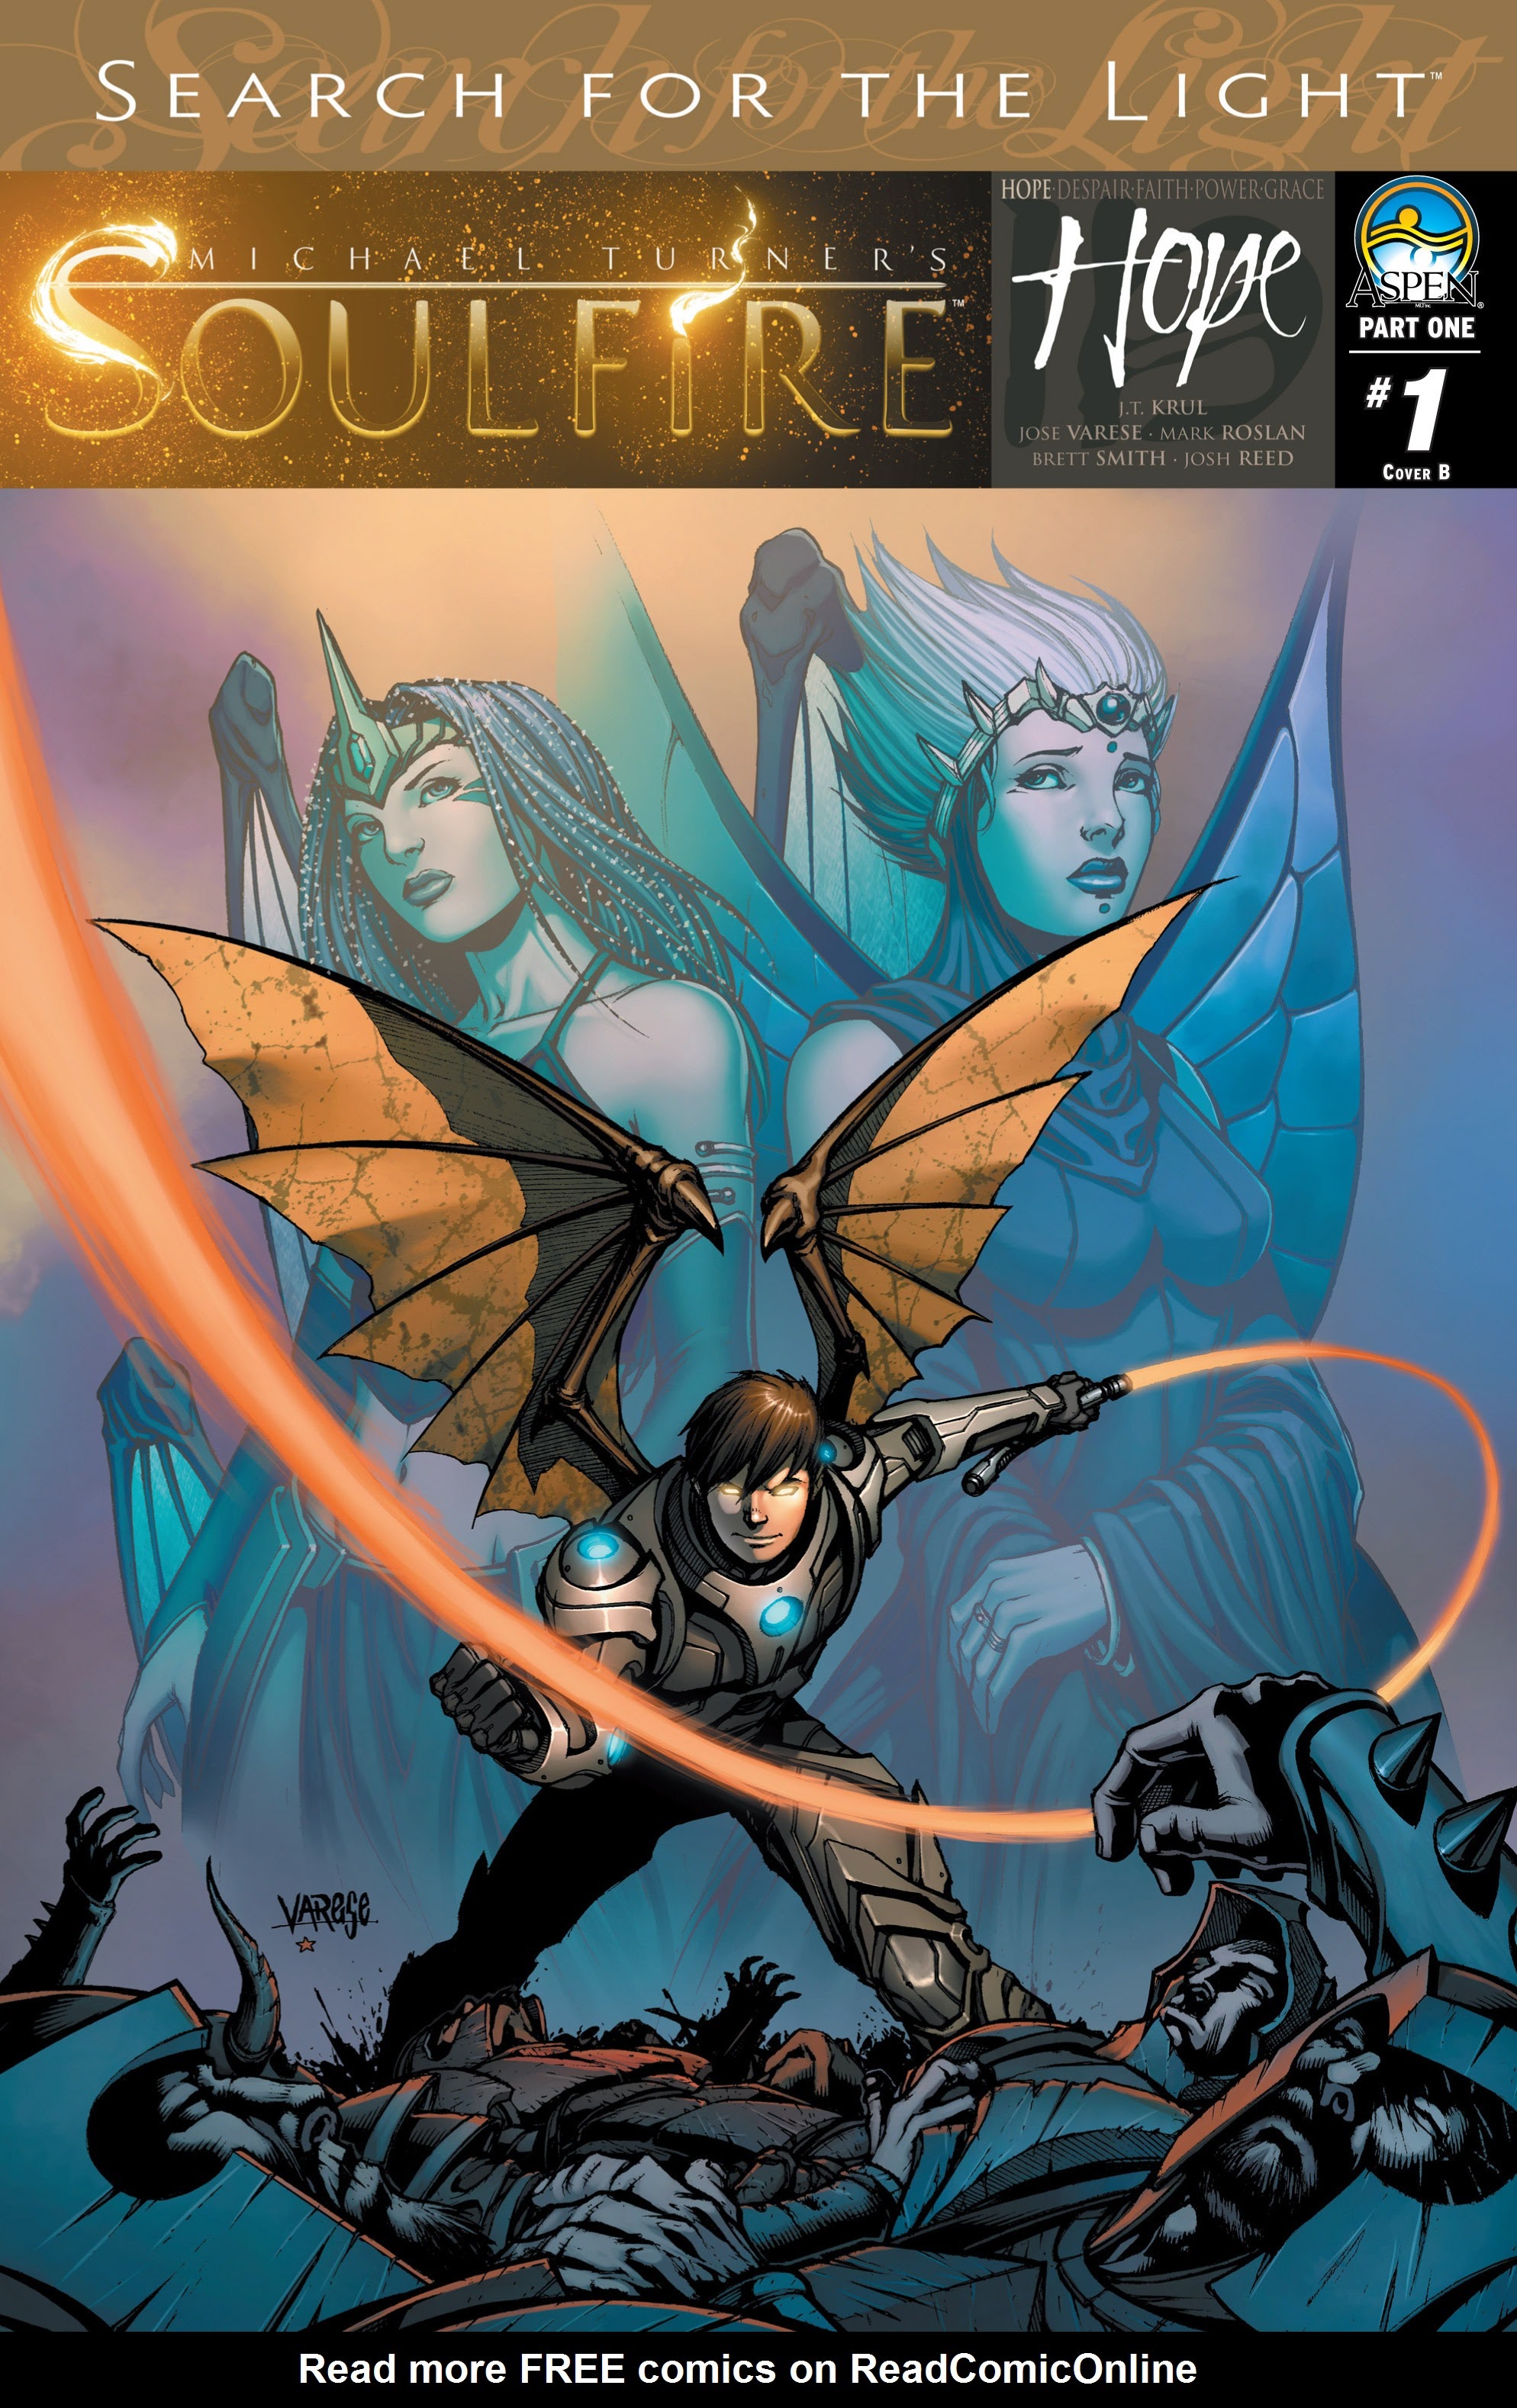 Read online Soulfire: Search For the Light comic -  Issue # TPB - 3